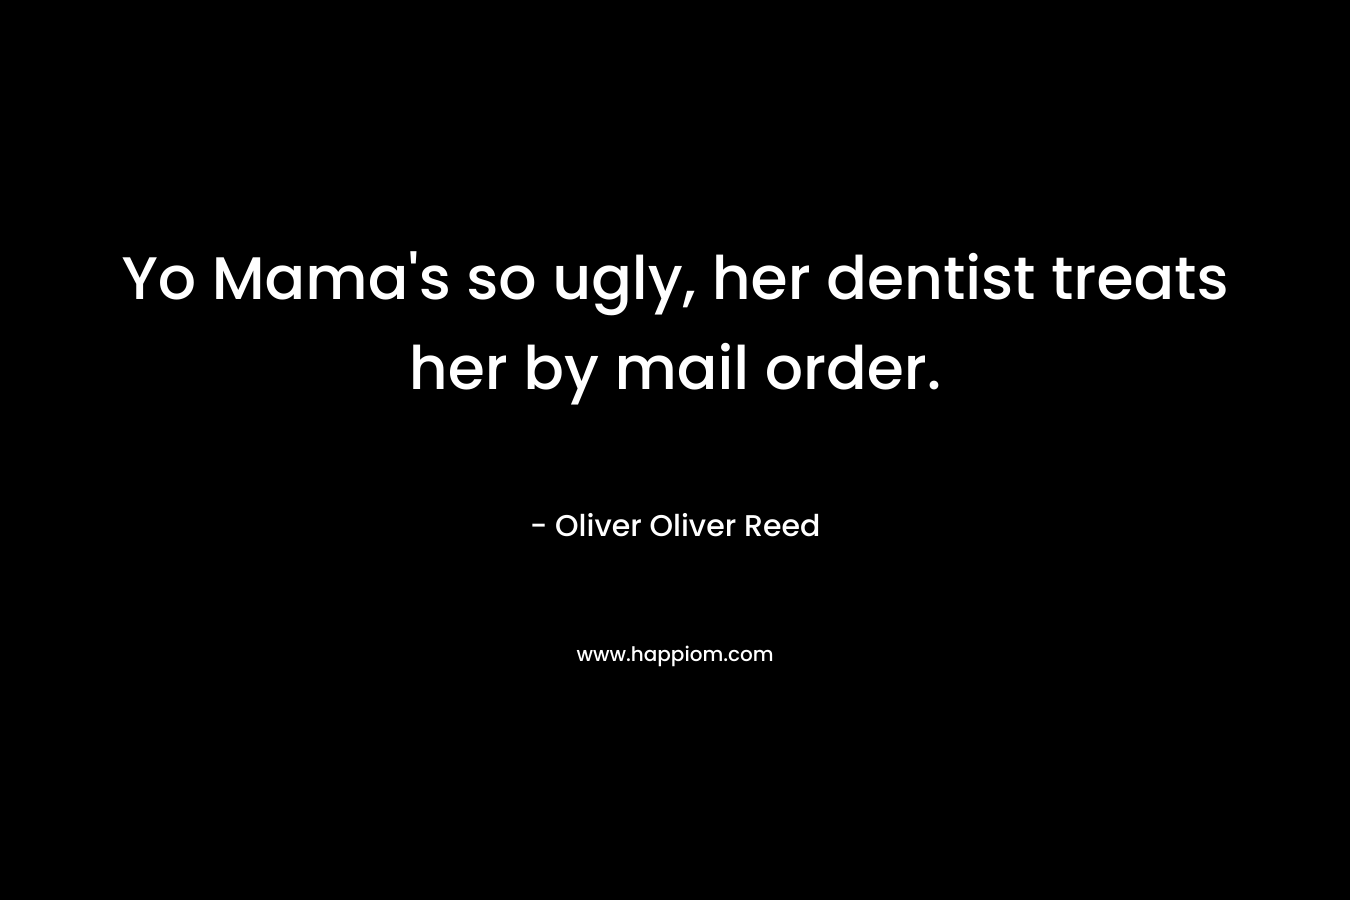 Yo Mama’s so ugly, her dentist treats her by mail order. – Oliver Oliver Reed